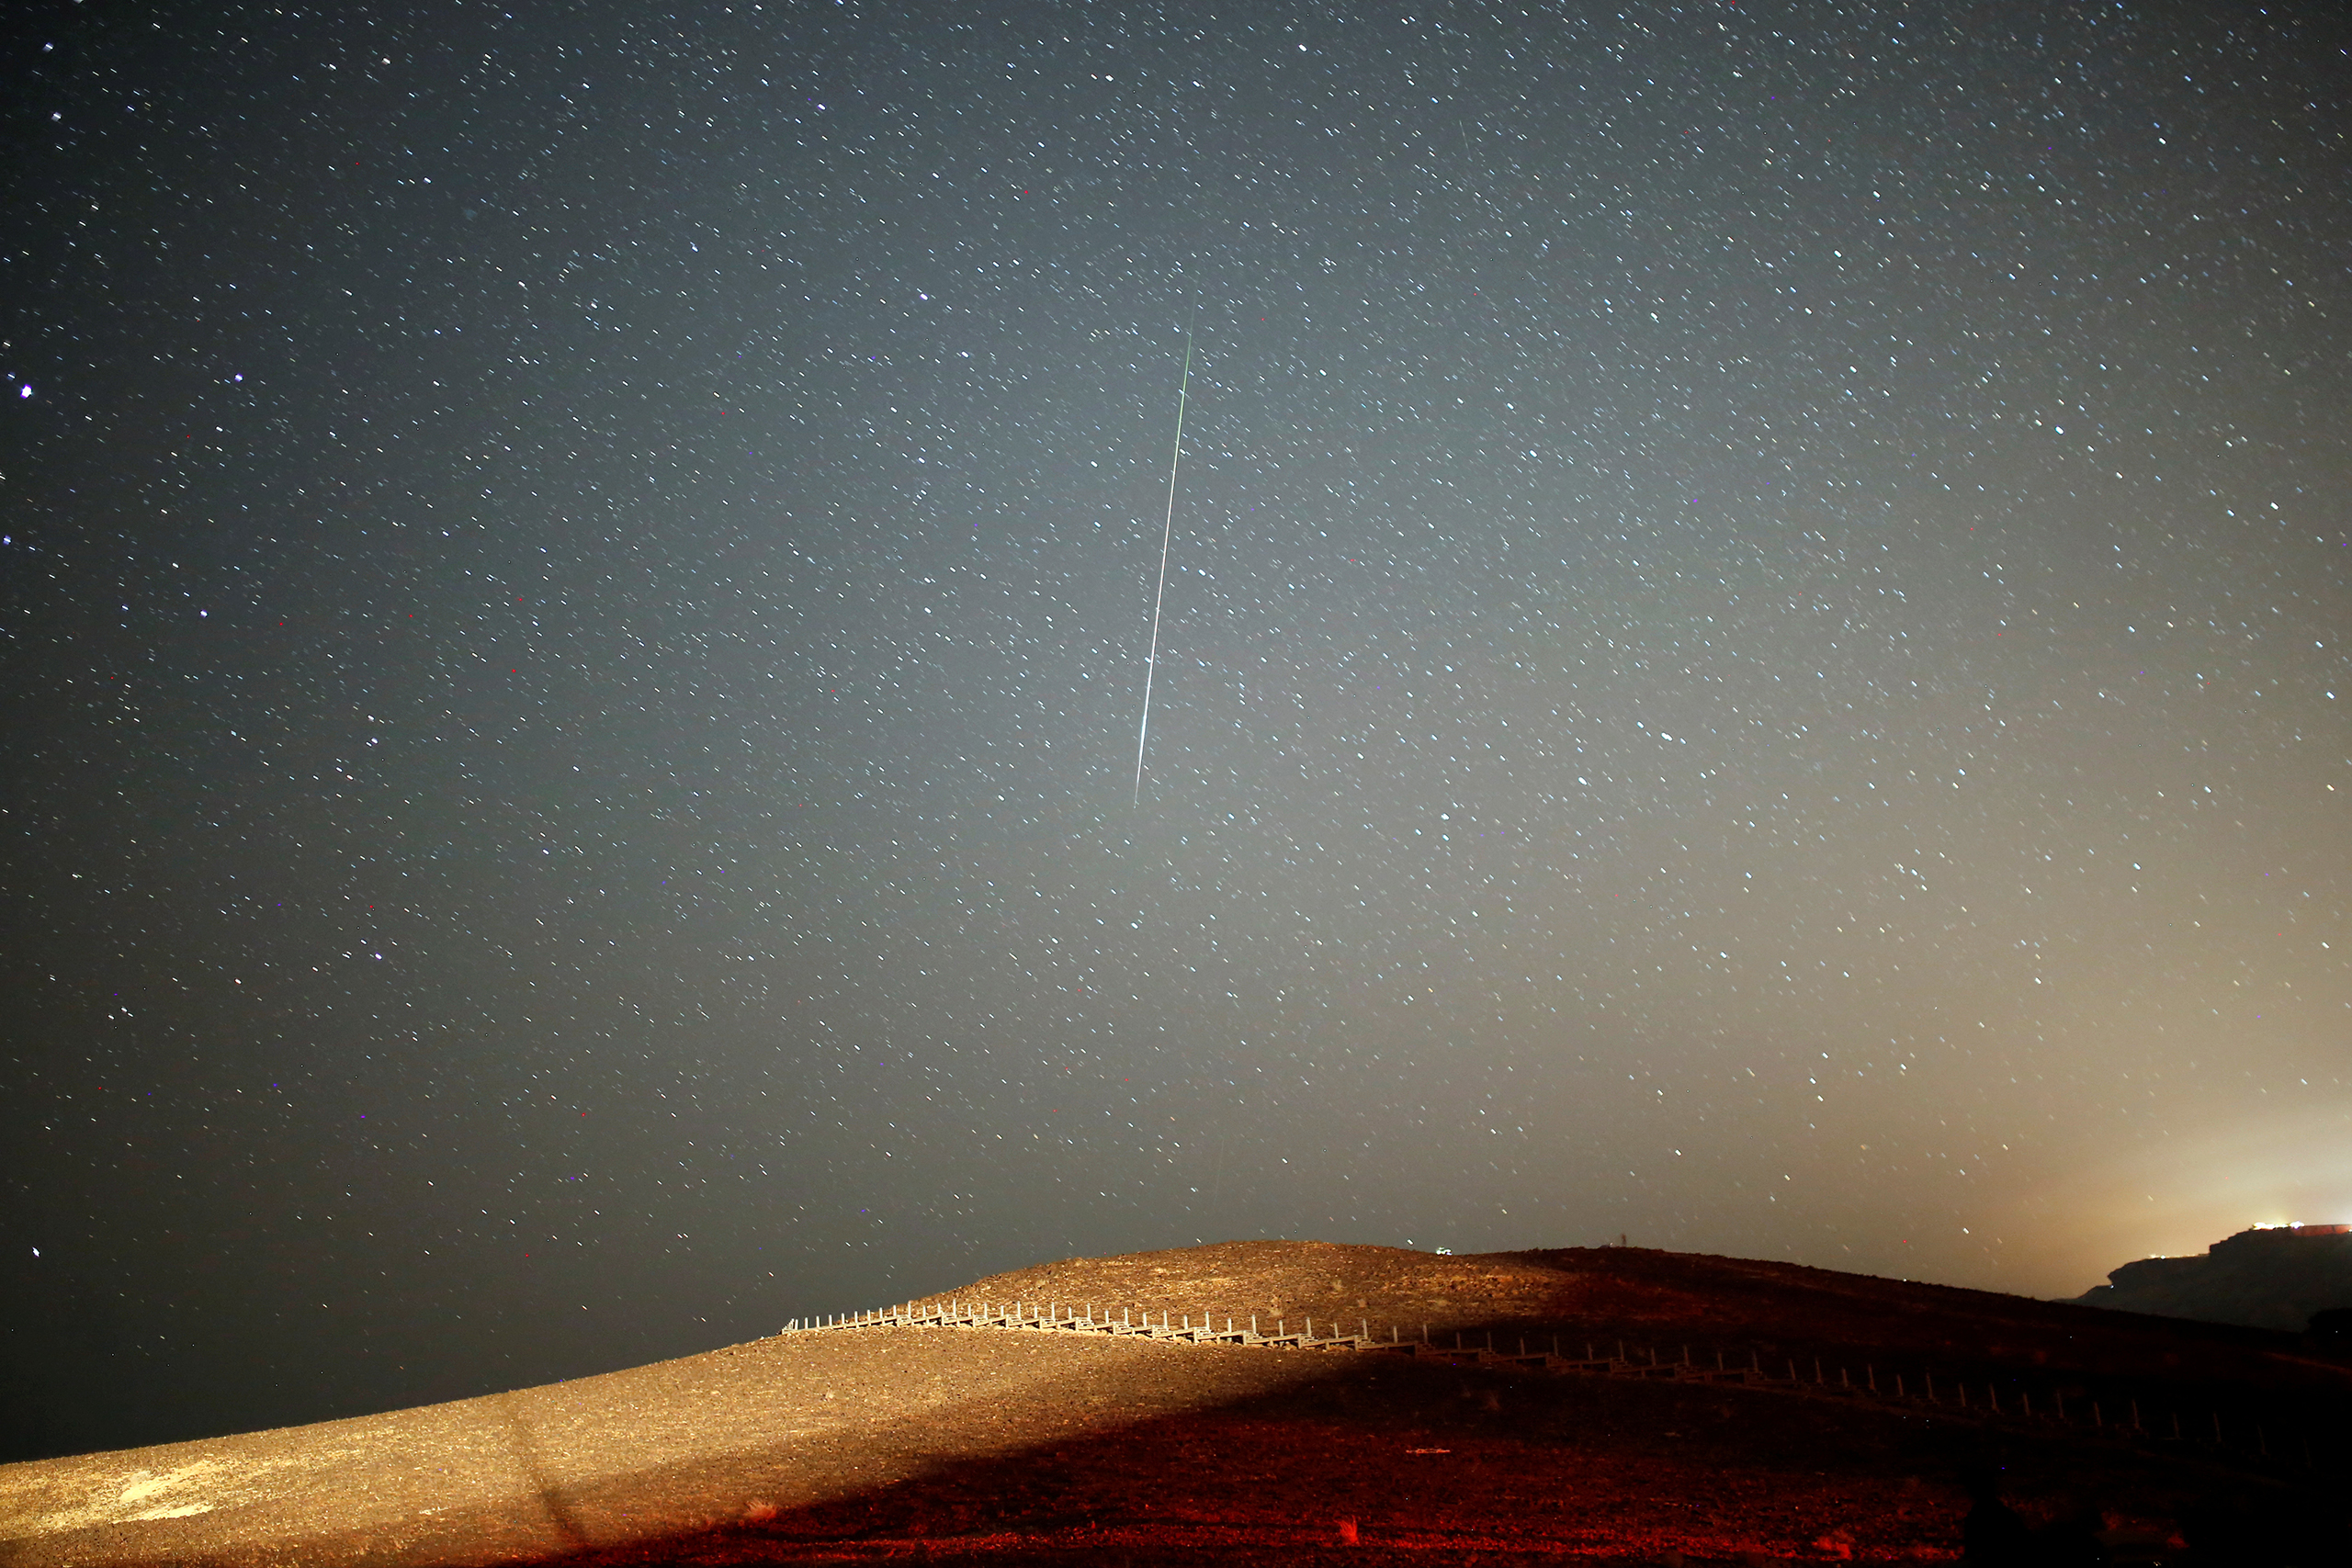 A meteor streaks across the sky in the early morning during the Perseid meteor shower in Ramon Crater near the town of Mitzpe Ramon, southern Israel, Aug. 12, 2016.